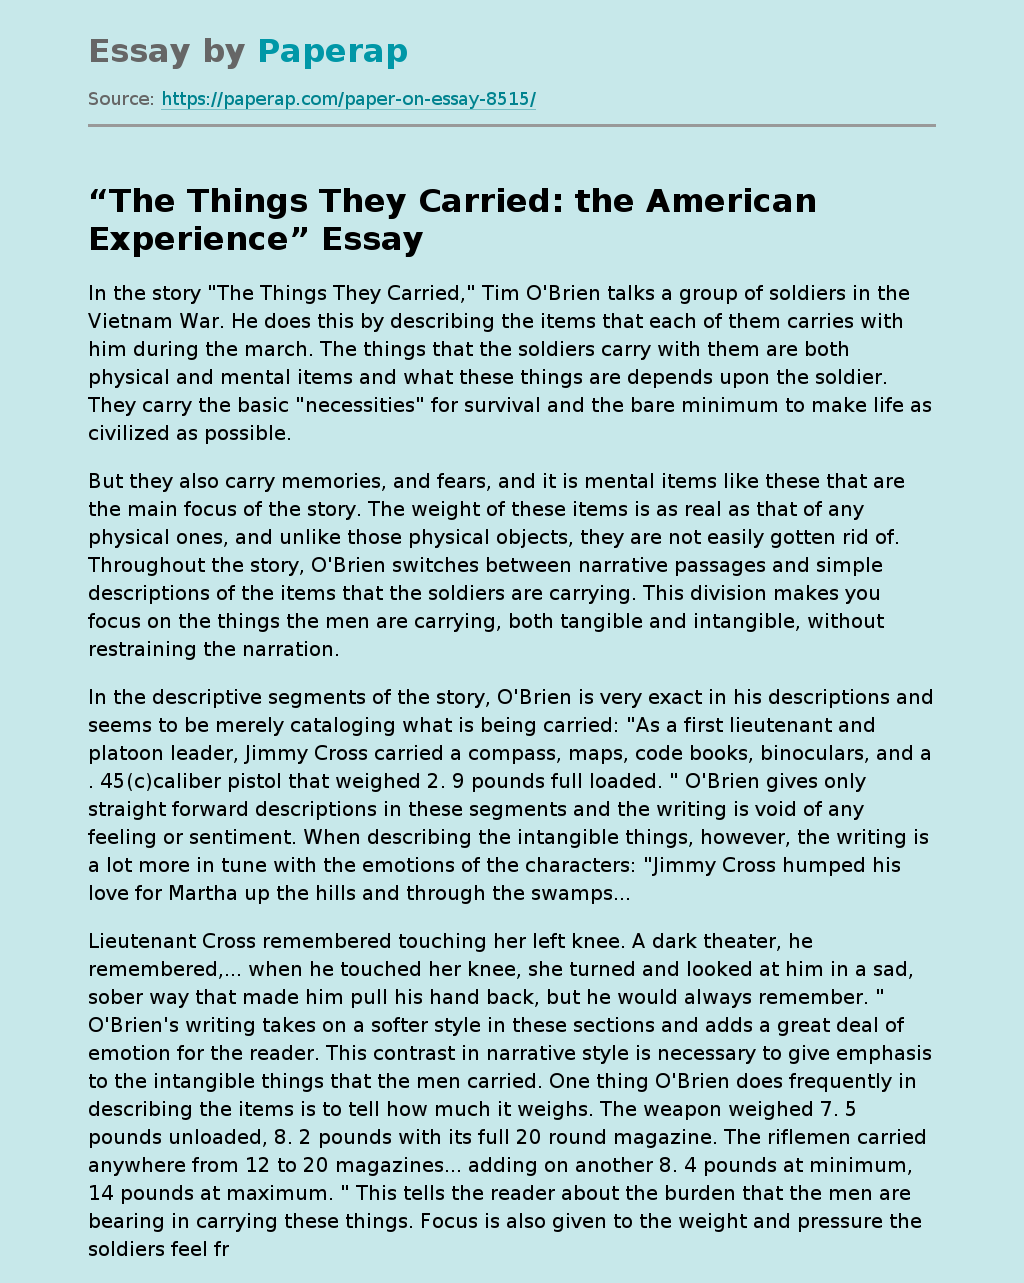 “The Things They Carried” by Tim O'Brien